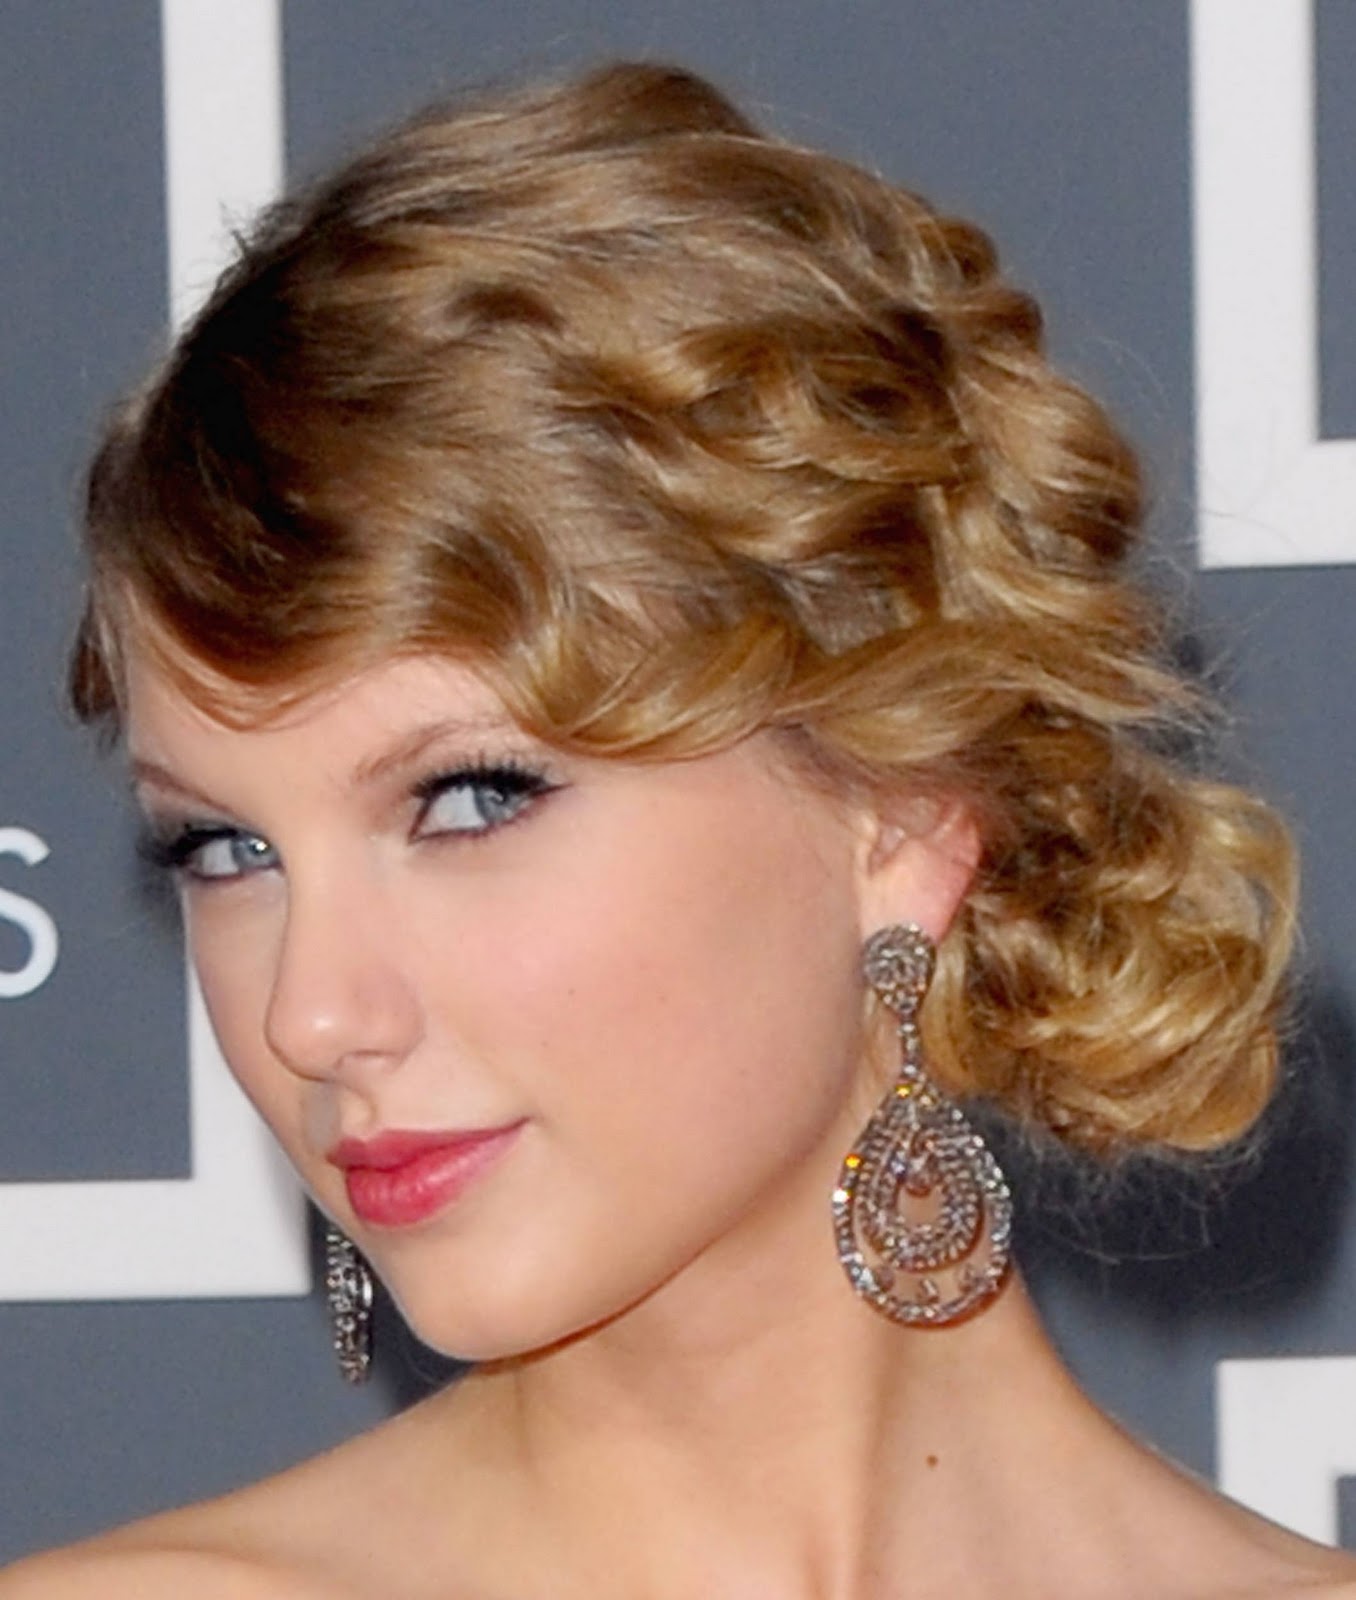 Curly Hairstyles For Prom Taylor Swift Taylor Swift Long Hairstyles with bangs 2012, hairspray lyrics 